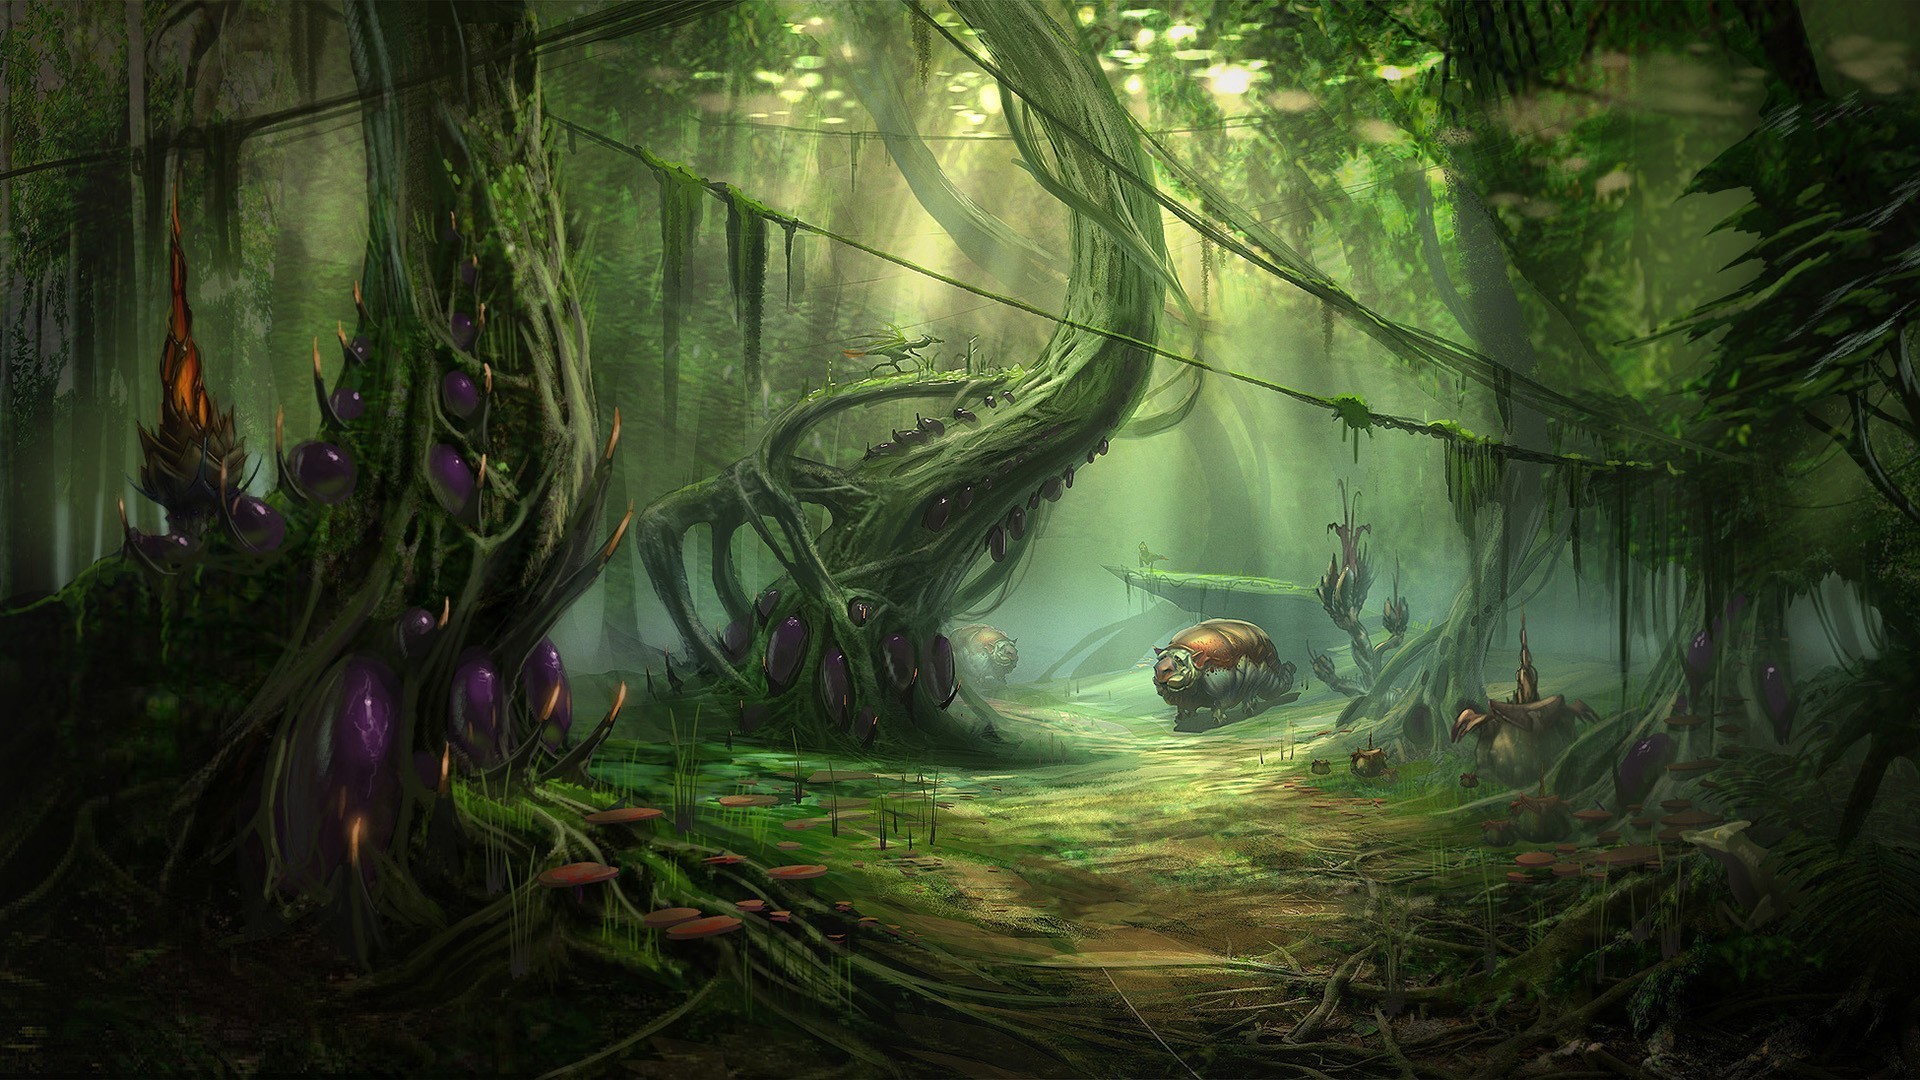 Nature Jungle Forest Planets Fantasy Art Alien Landscapes - Search Your Library For Up To 3 Basic Lands , HD Wallpaper & Backgrounds